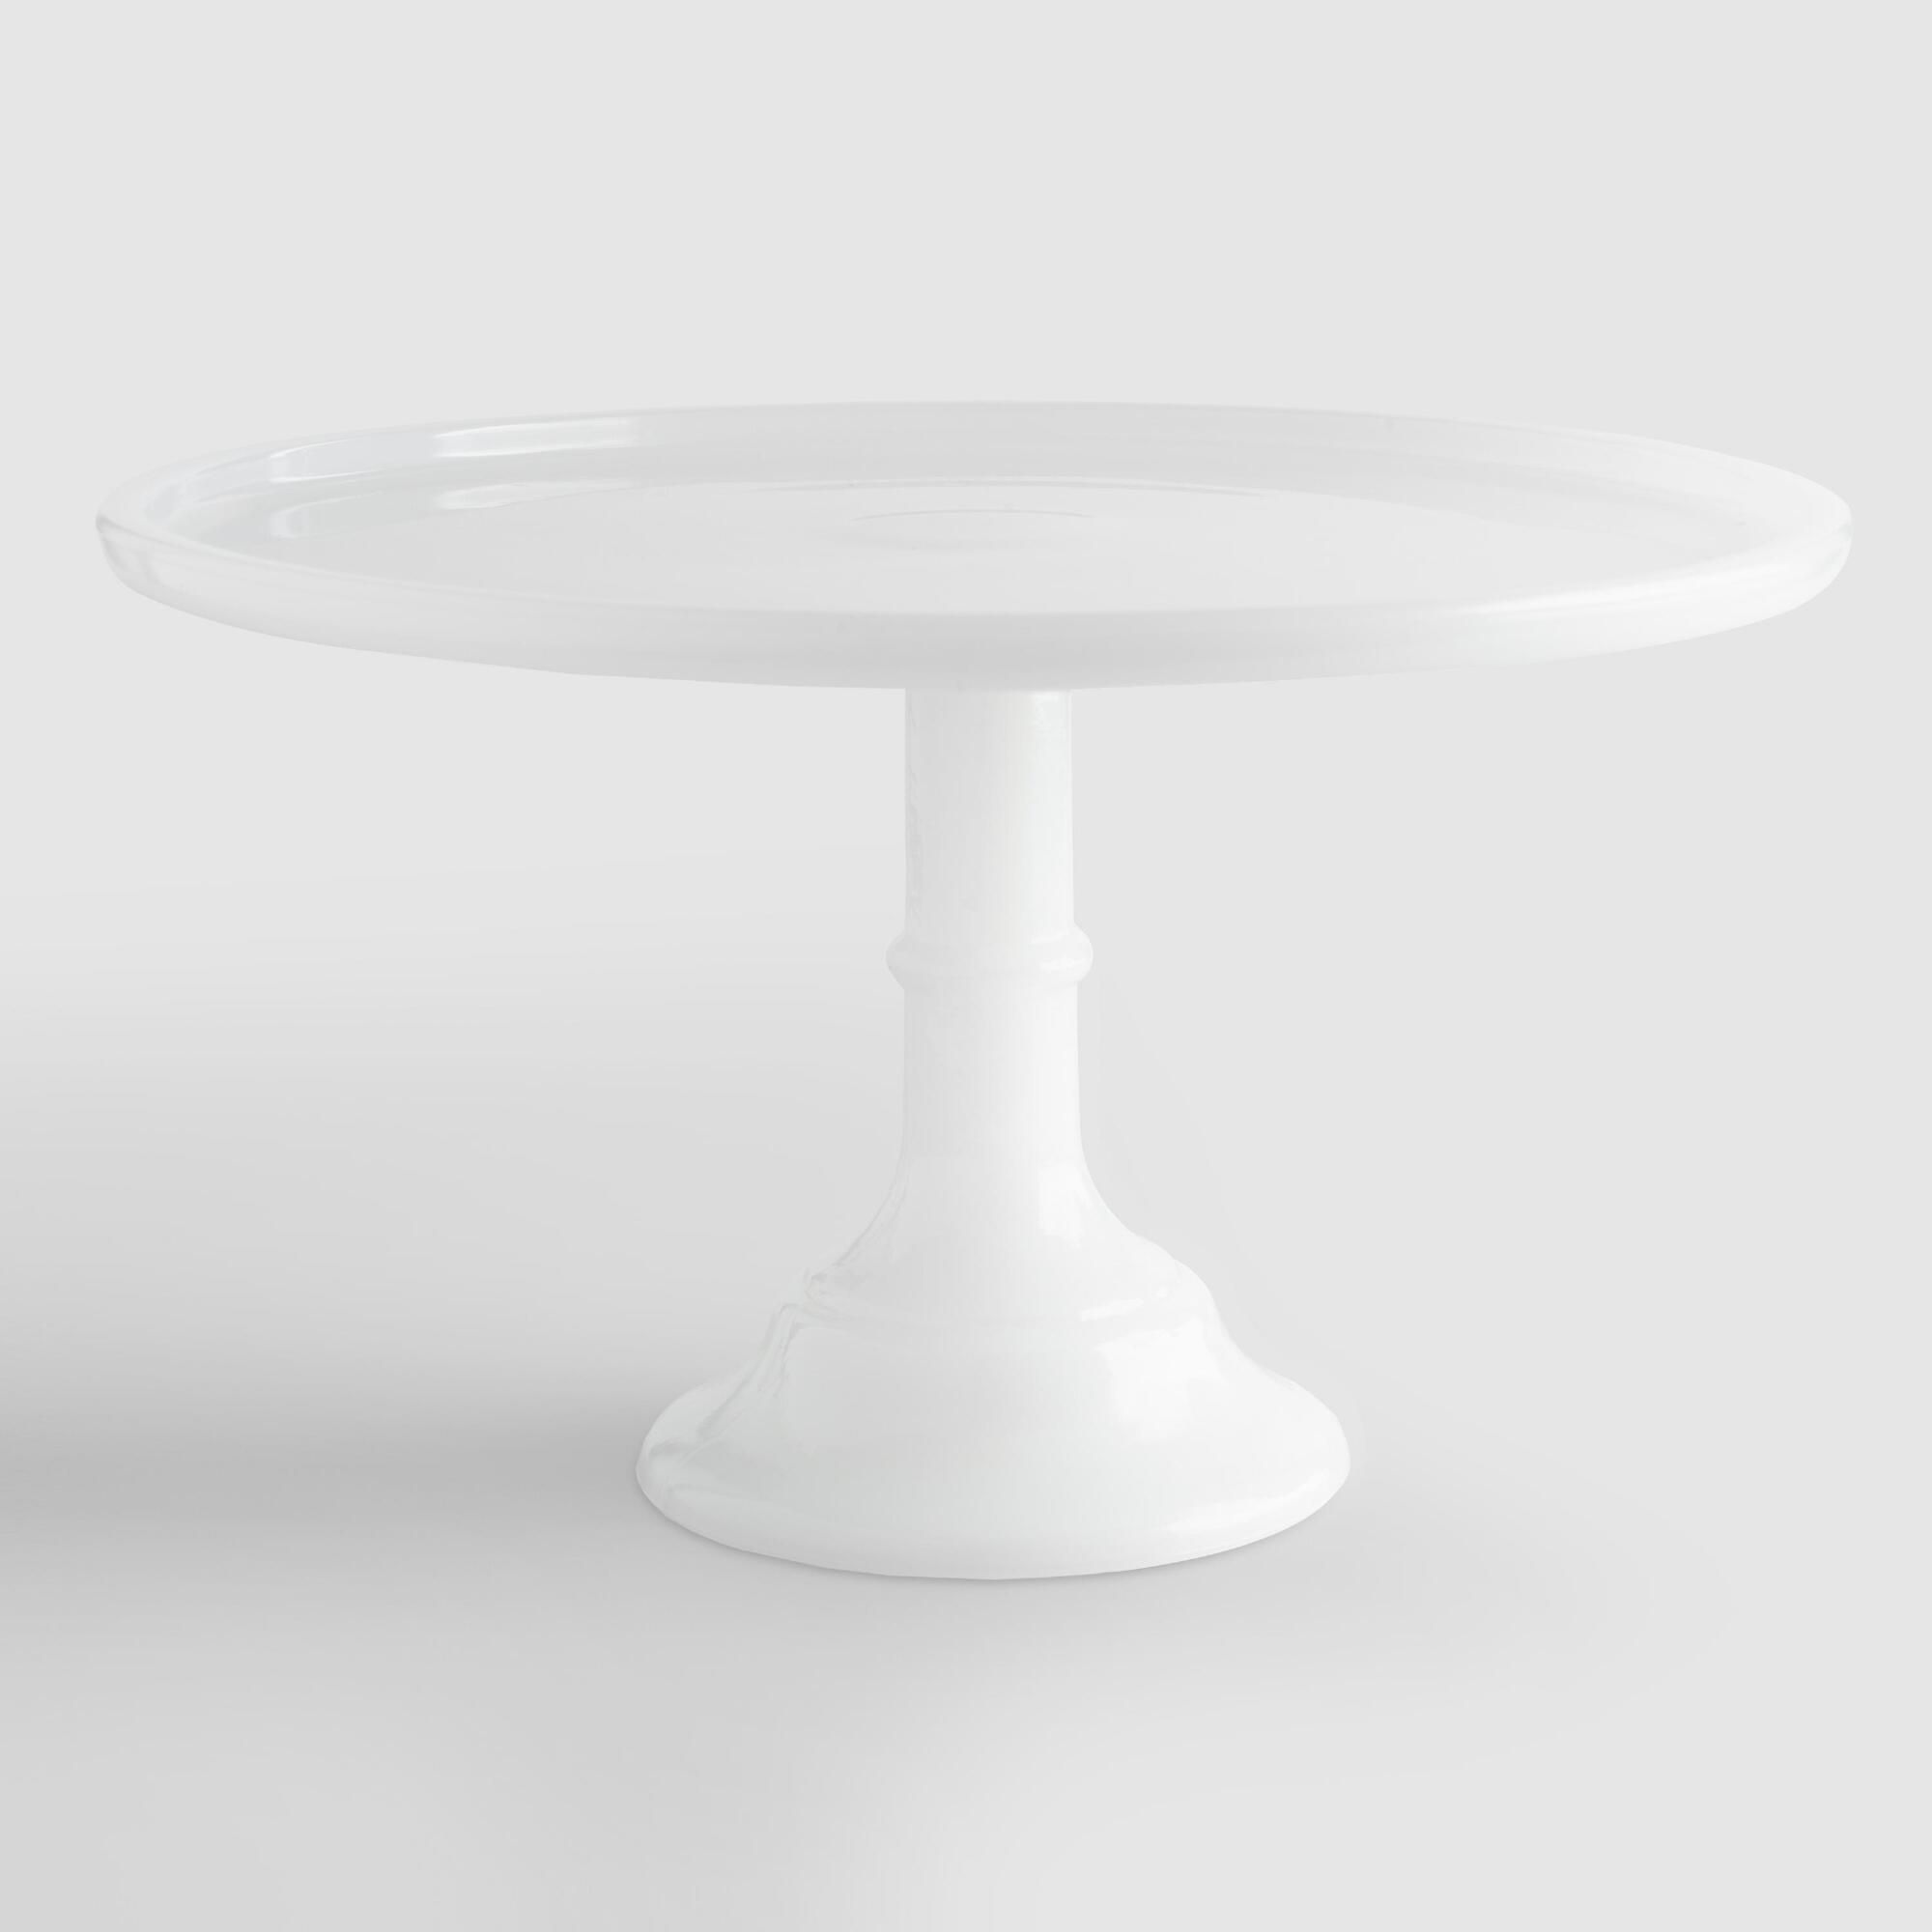 White Frosted Glass Pedestal Stand - 12.5In by World Market 12.5In | World Market